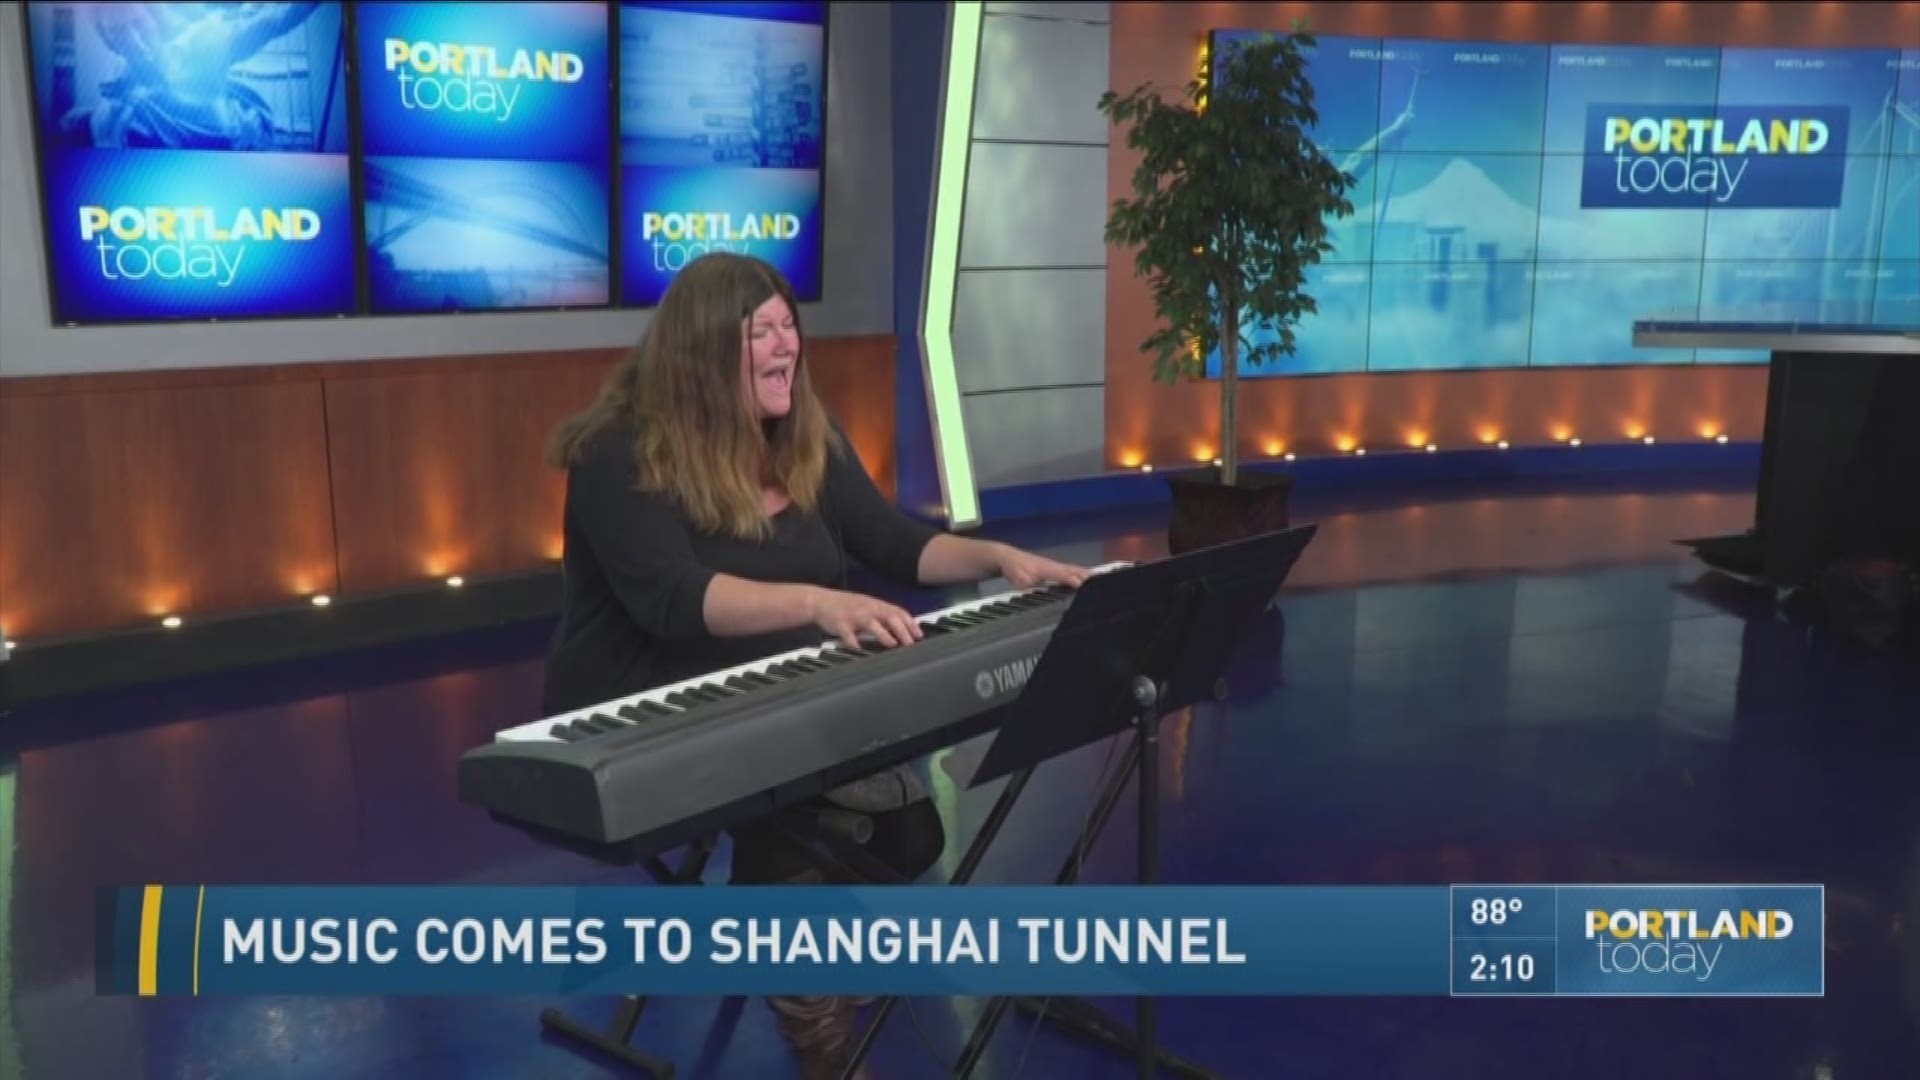 Music comes to Shanghai Tunnel